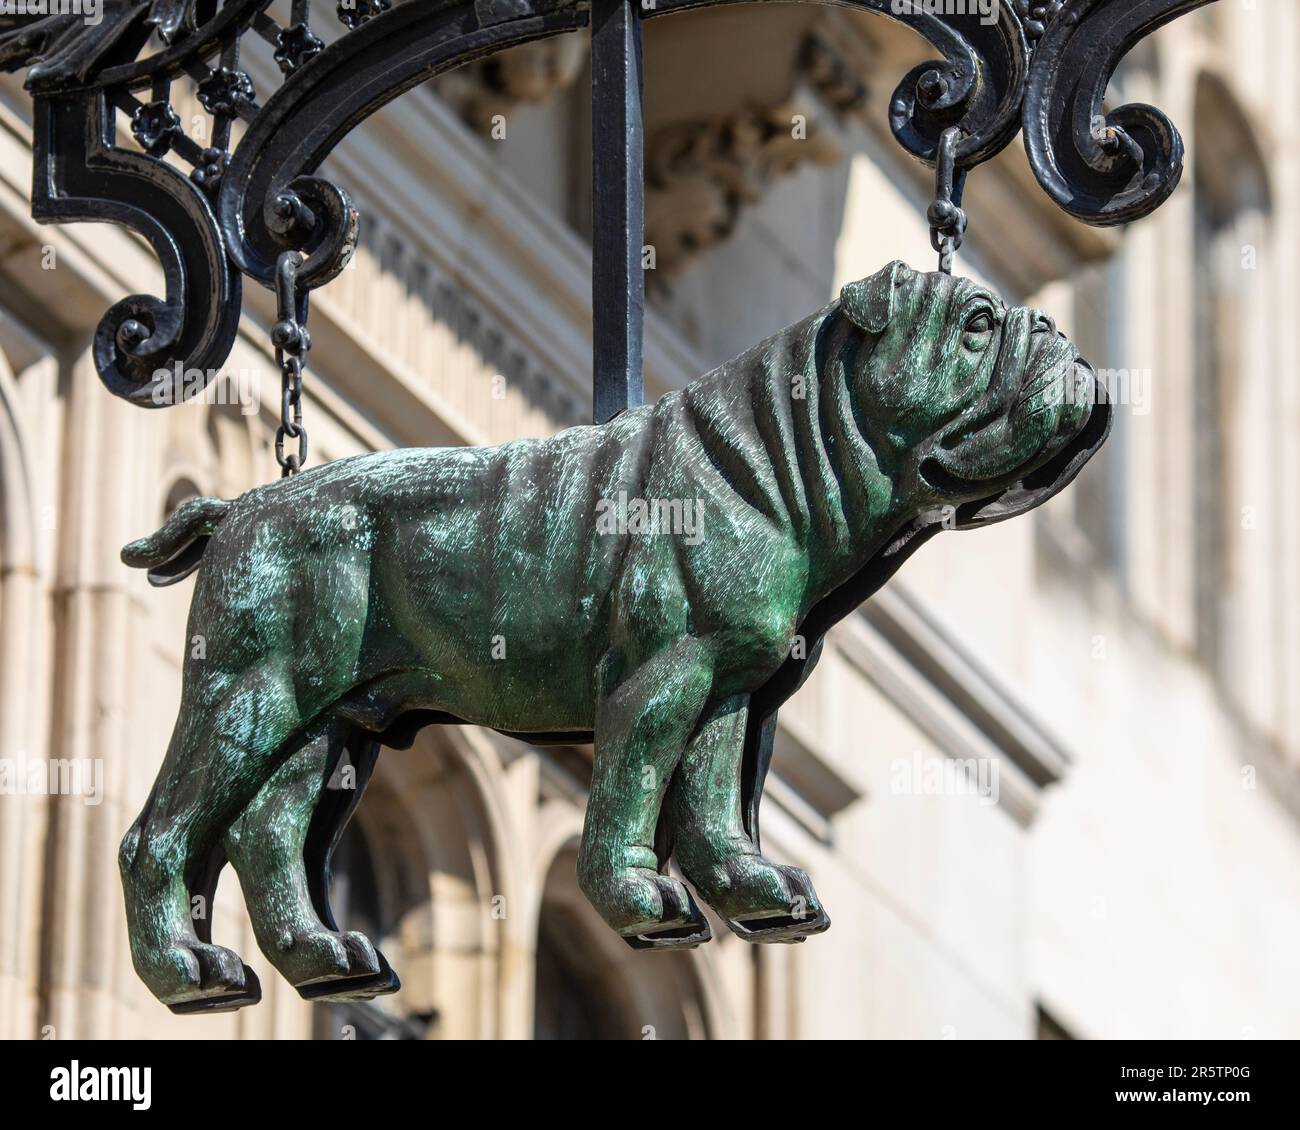 London, UK - April 20th 2023: Close-up of a Bulldog hanging sign on the exterior of Two Temple Place in London, UK. Stock Photo